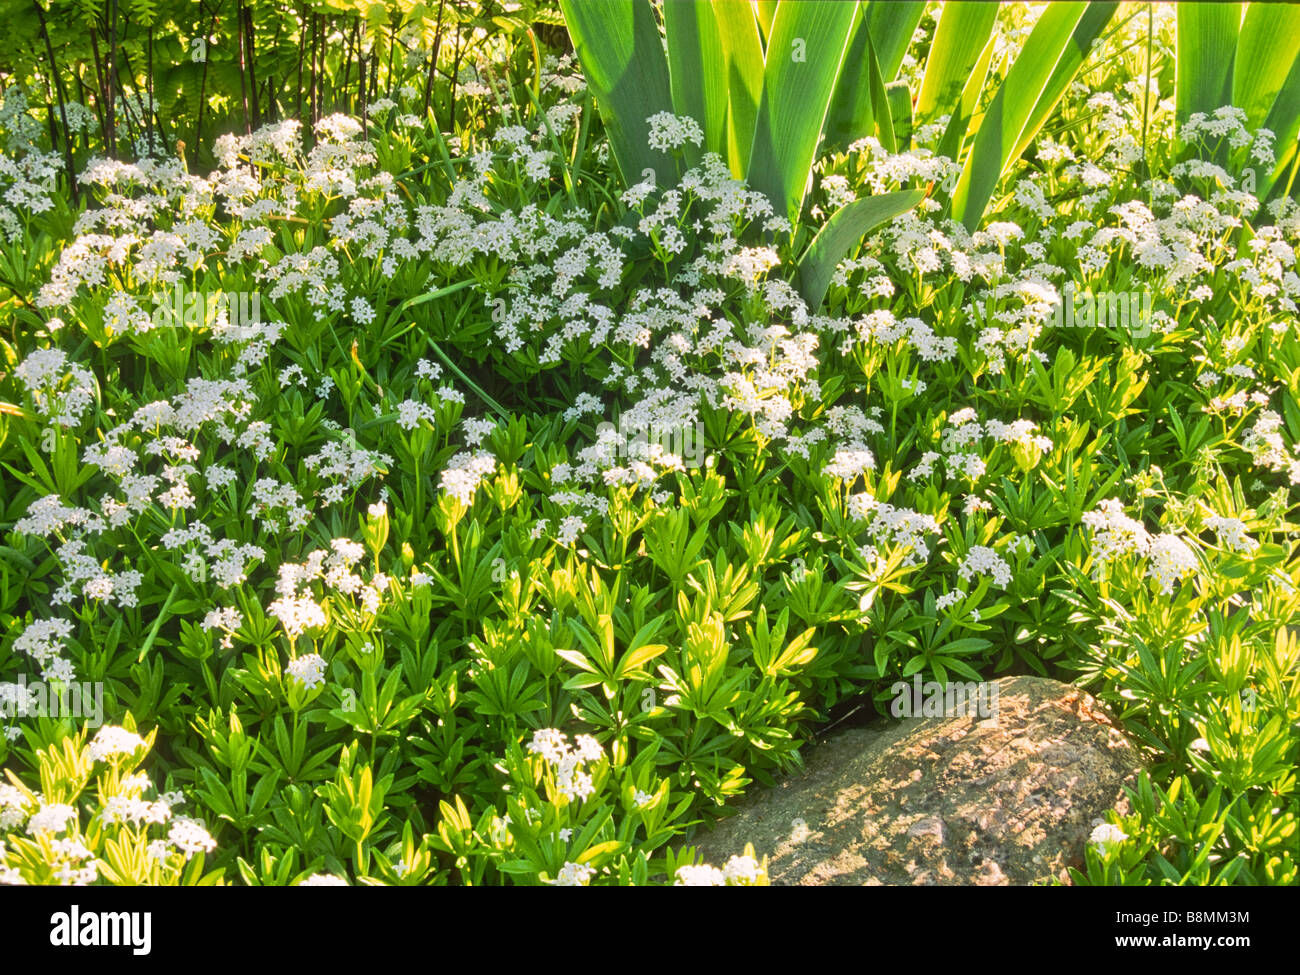 Close up of the groundcover Sweet Woodruff (Galium odoratum) a fragrant herb blooming in spring. Stock Photo